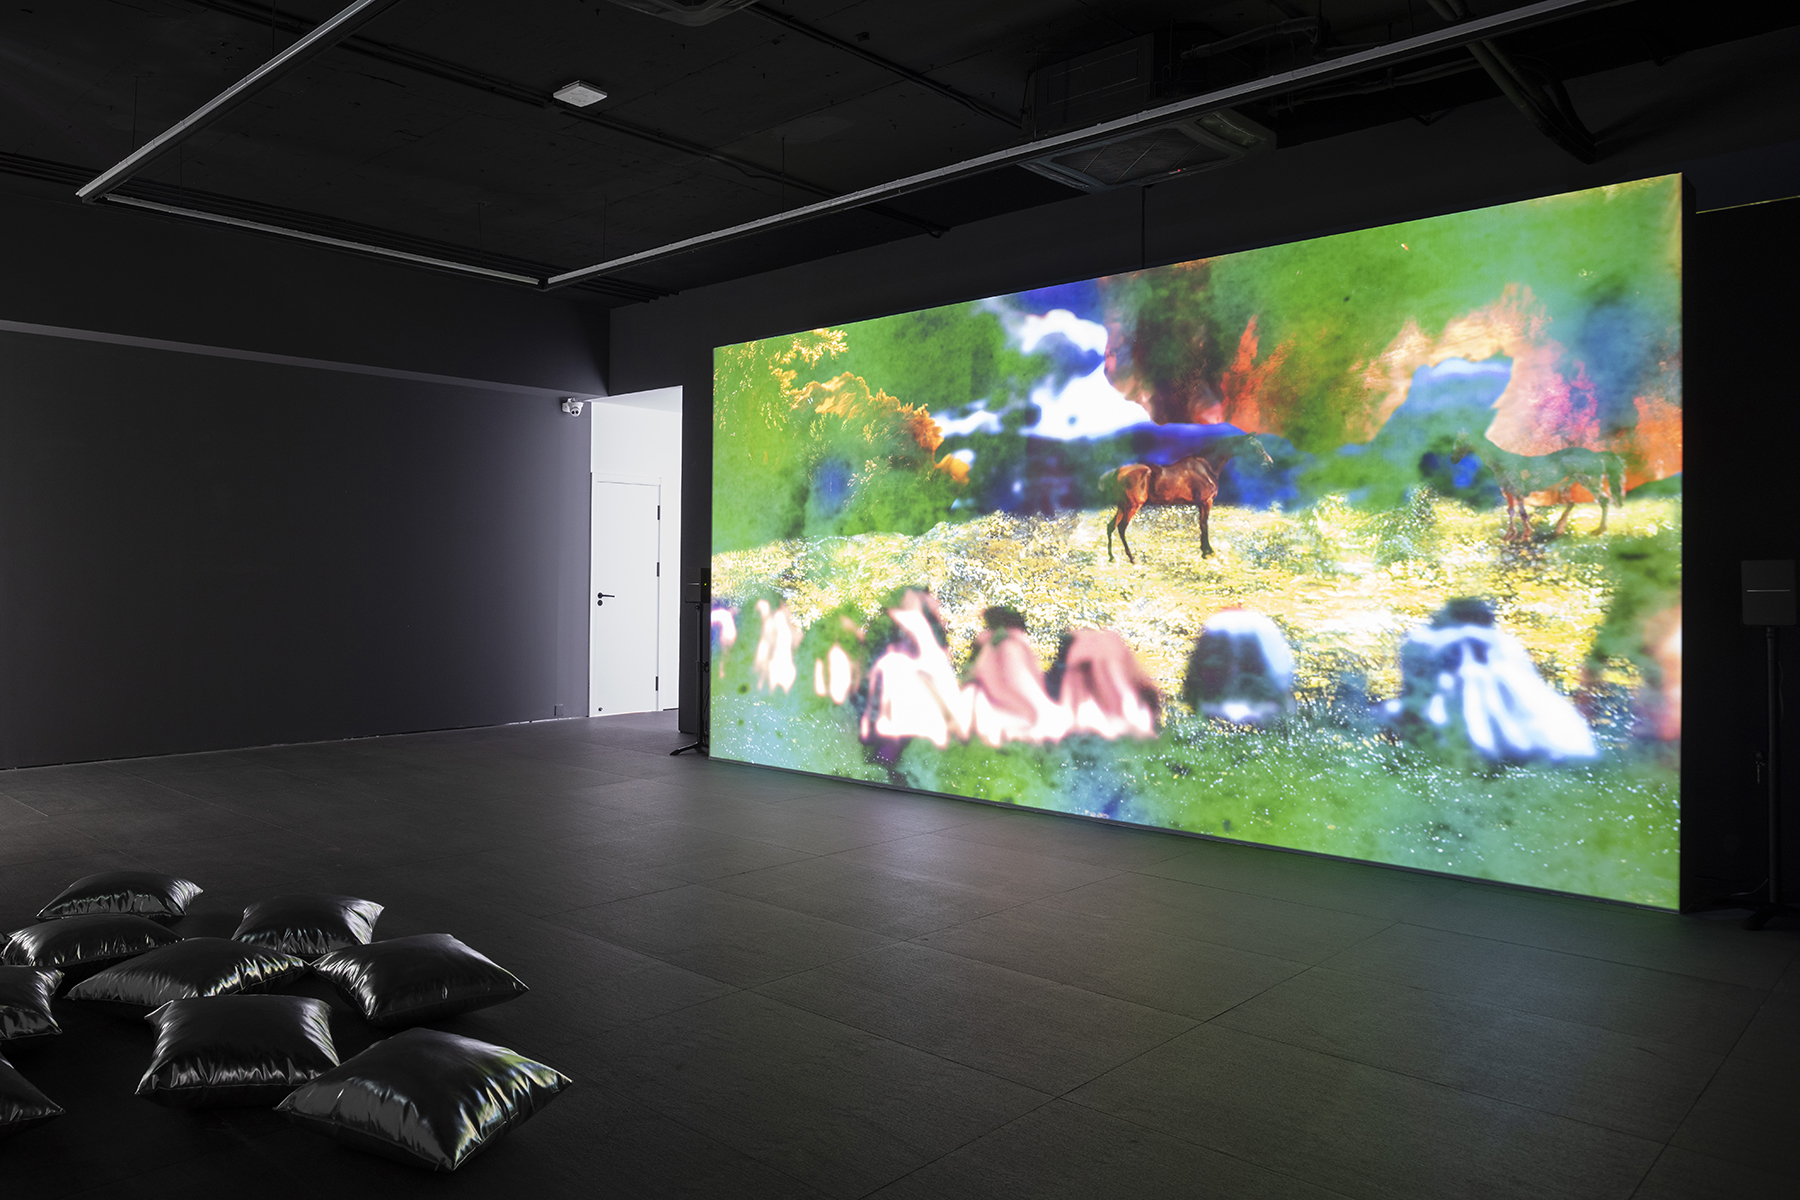 Close, Closer (2020-21) installation shot, showing an image of horses being projected on a screen and some black cushions in the corner